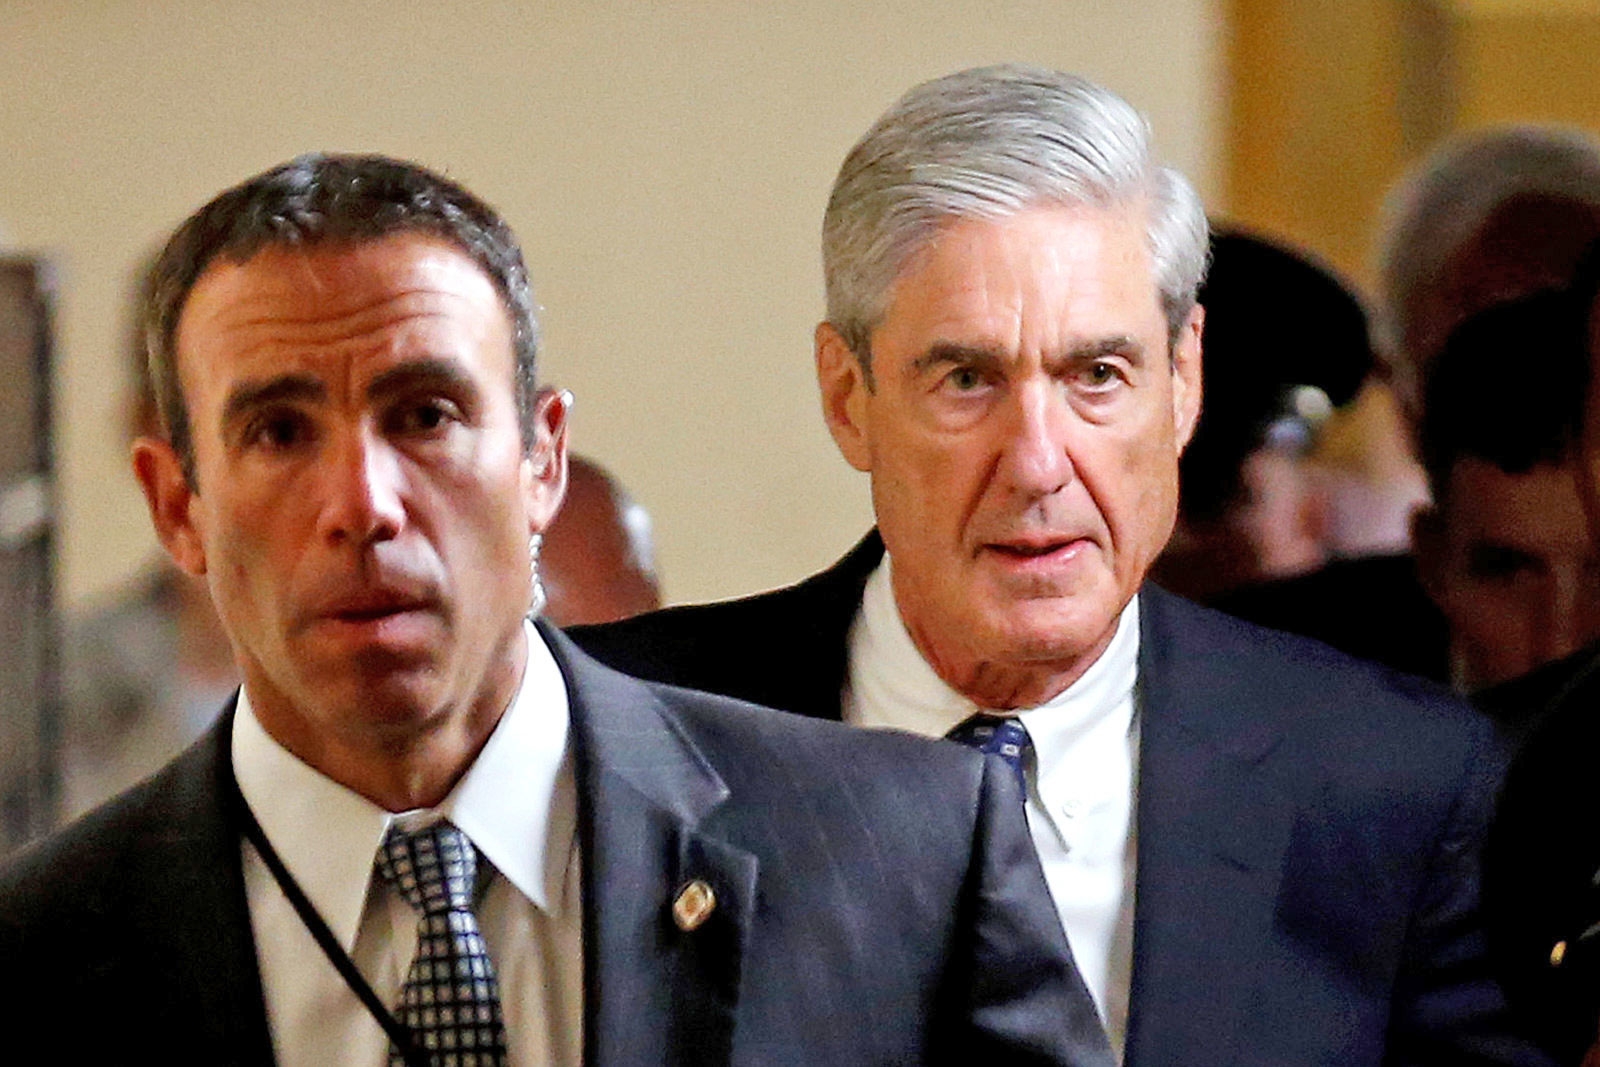 Mueller investigation obtains thousands of Trump transition emails | DeviceDaily.com